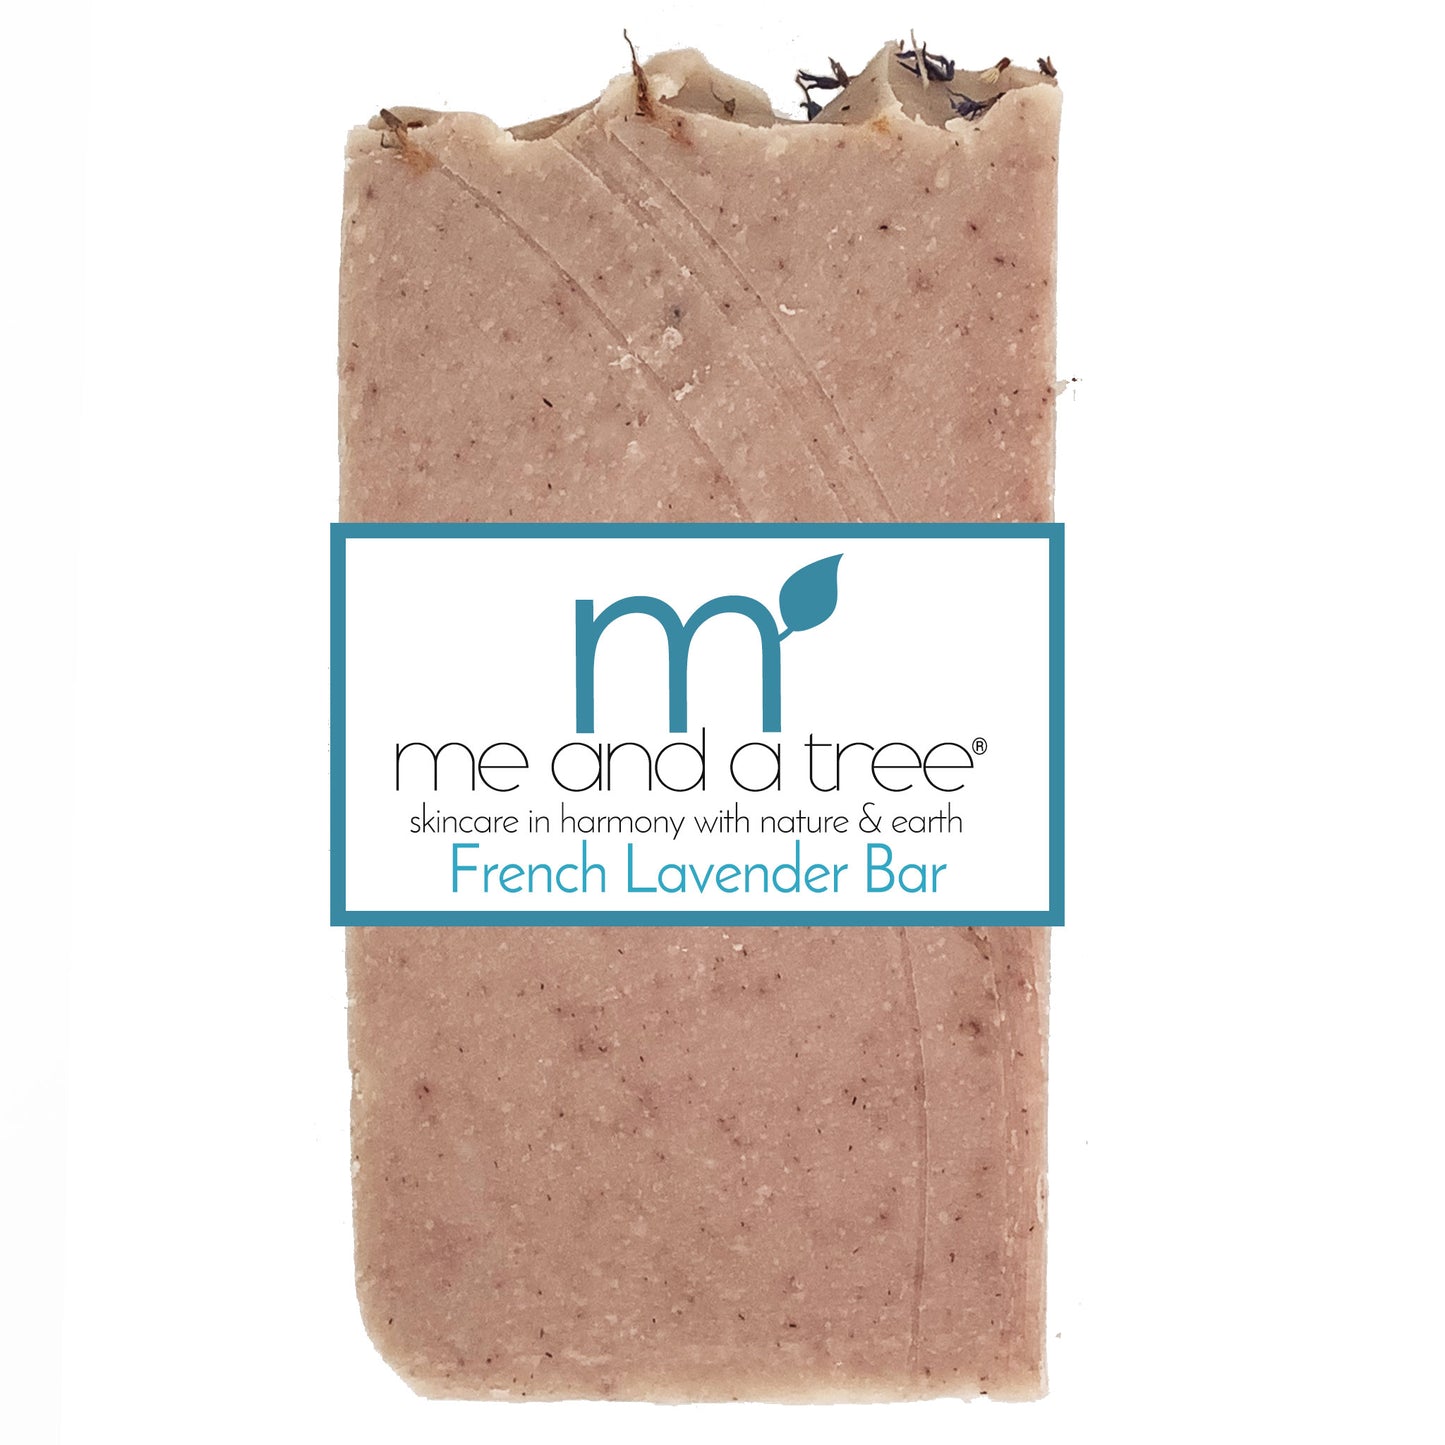 French Lavender Beauty Soap artisan handcrafted soap infused with pure French lavender essential oil, shea butter, and olive oil that offers a luxurious and relaxing all-in-one shampoo, body wash, facial, and smooth shaving soap.